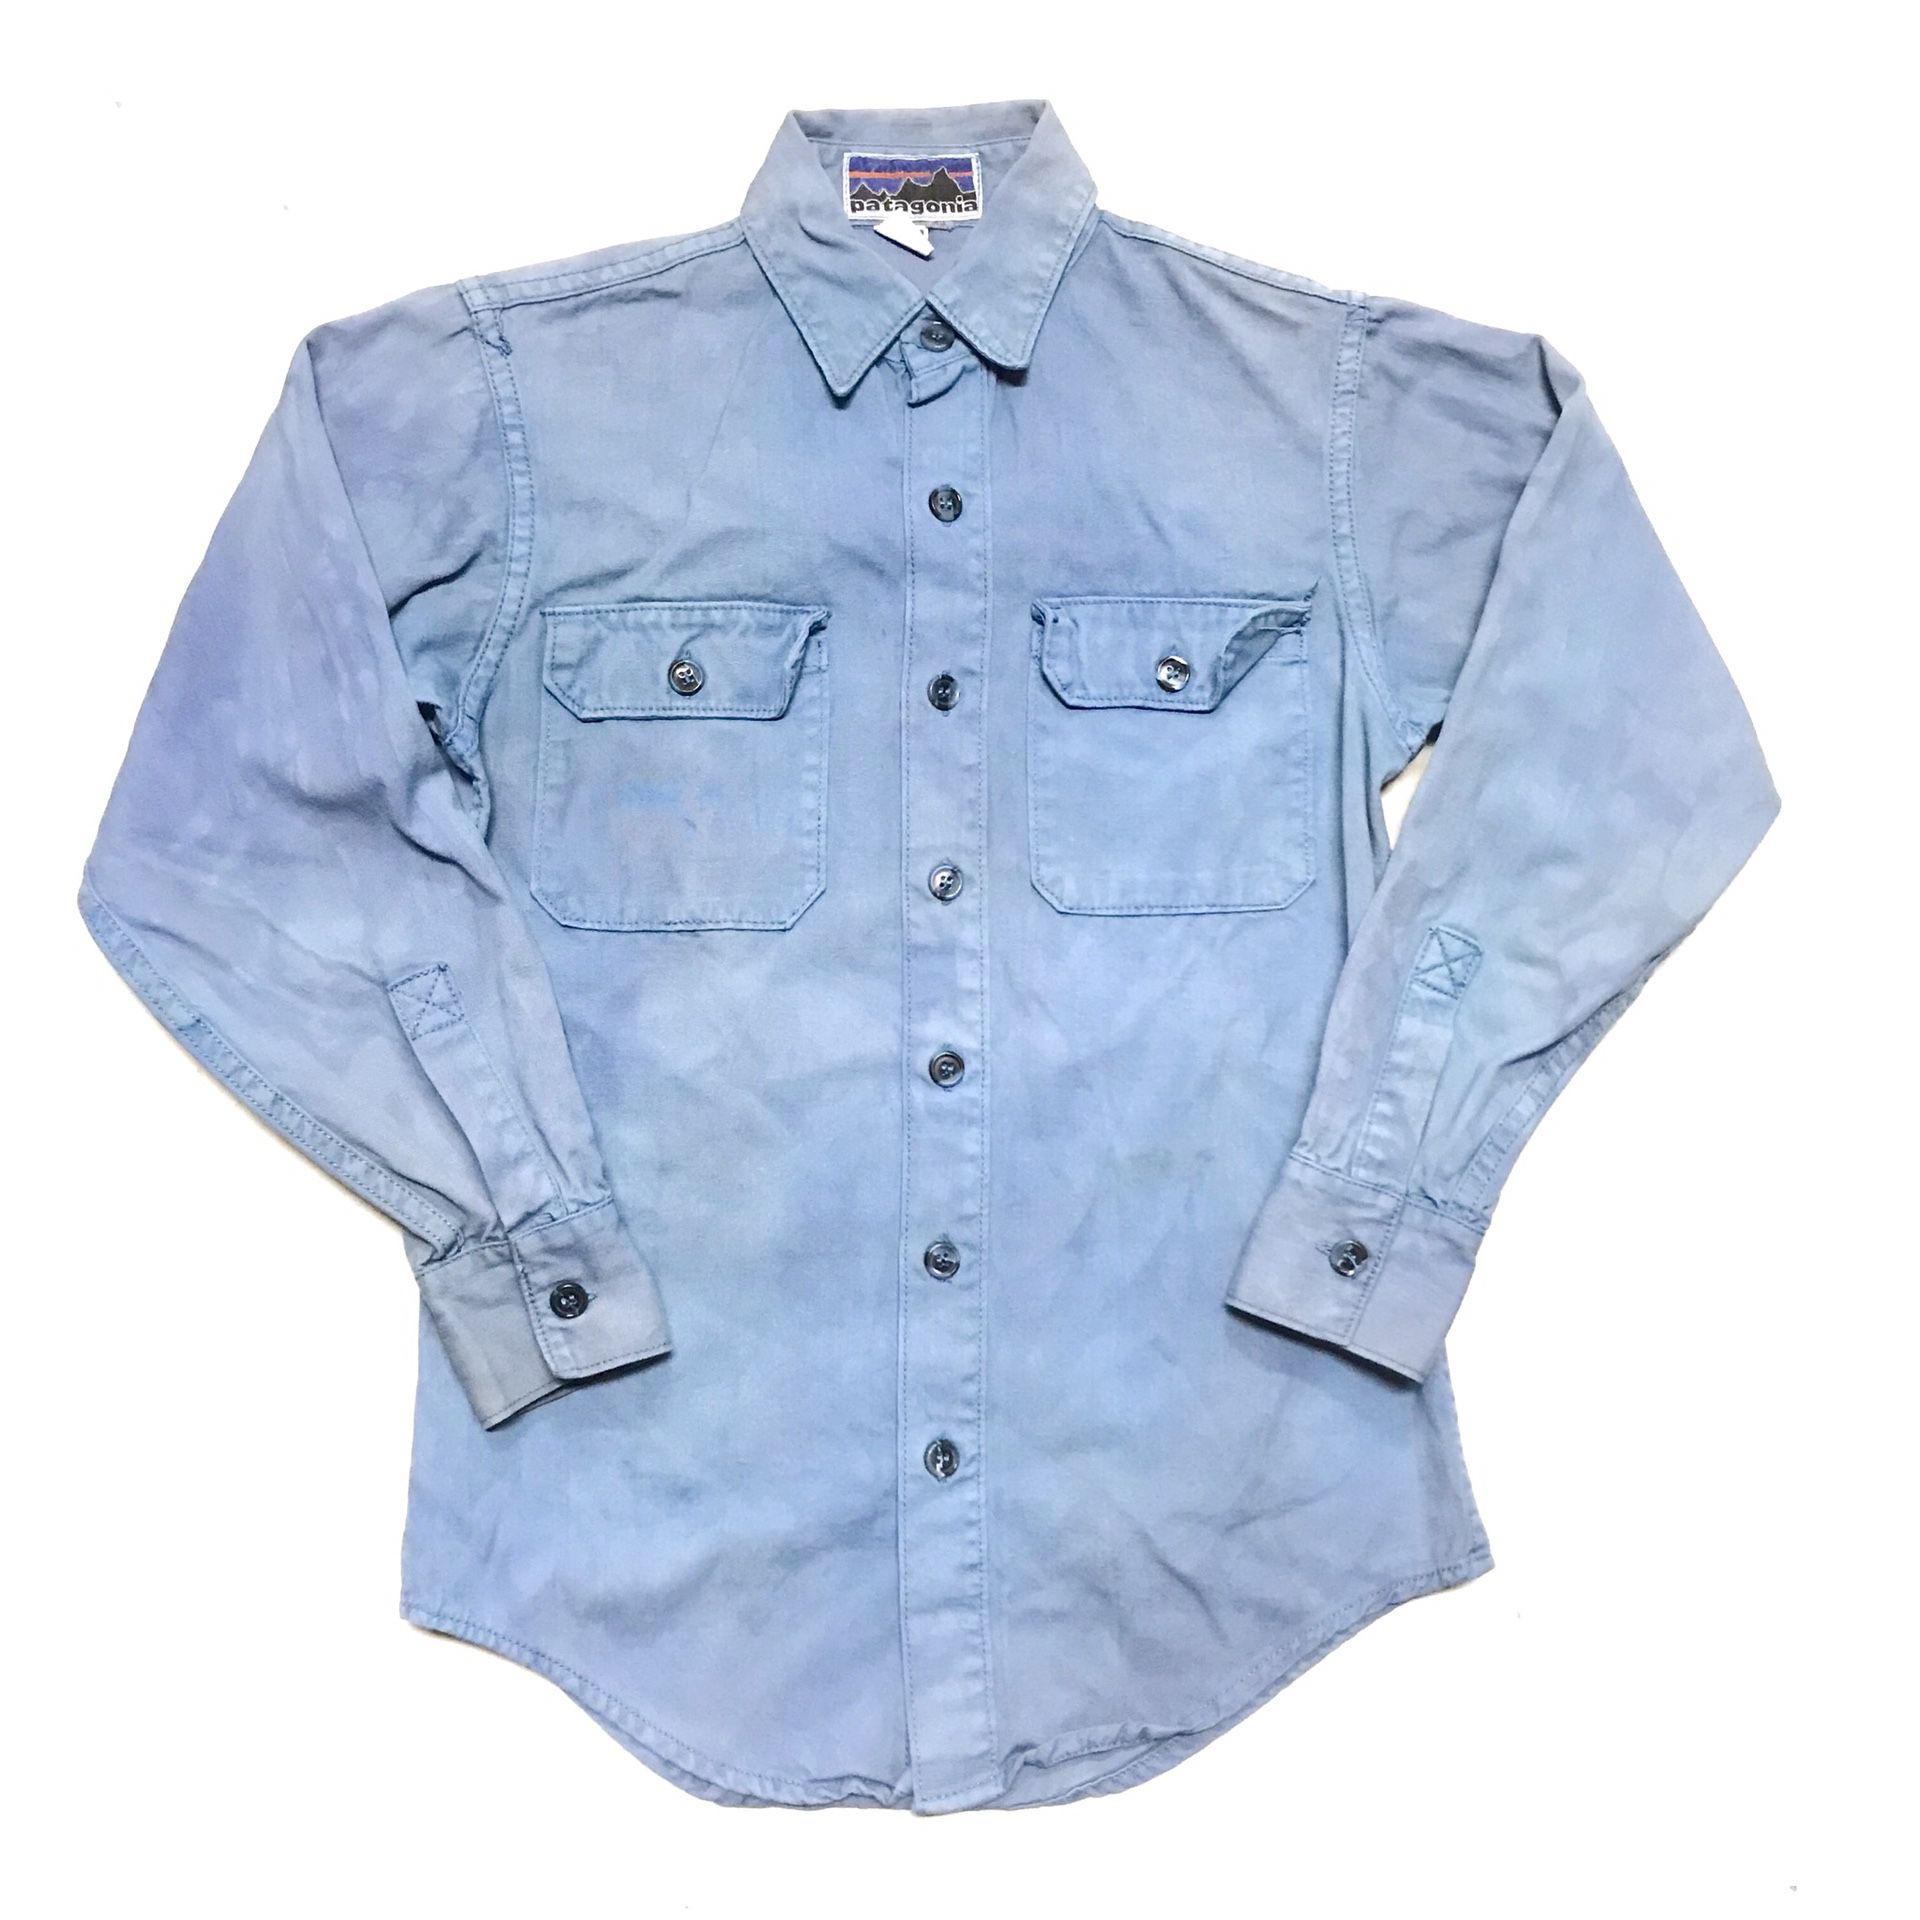 Vintage PATAGONIA Denim Button Up Shirt. Item is in excellent preowned condition w/ hand dyed blue finish 13.5oz. Size XS Extra Small